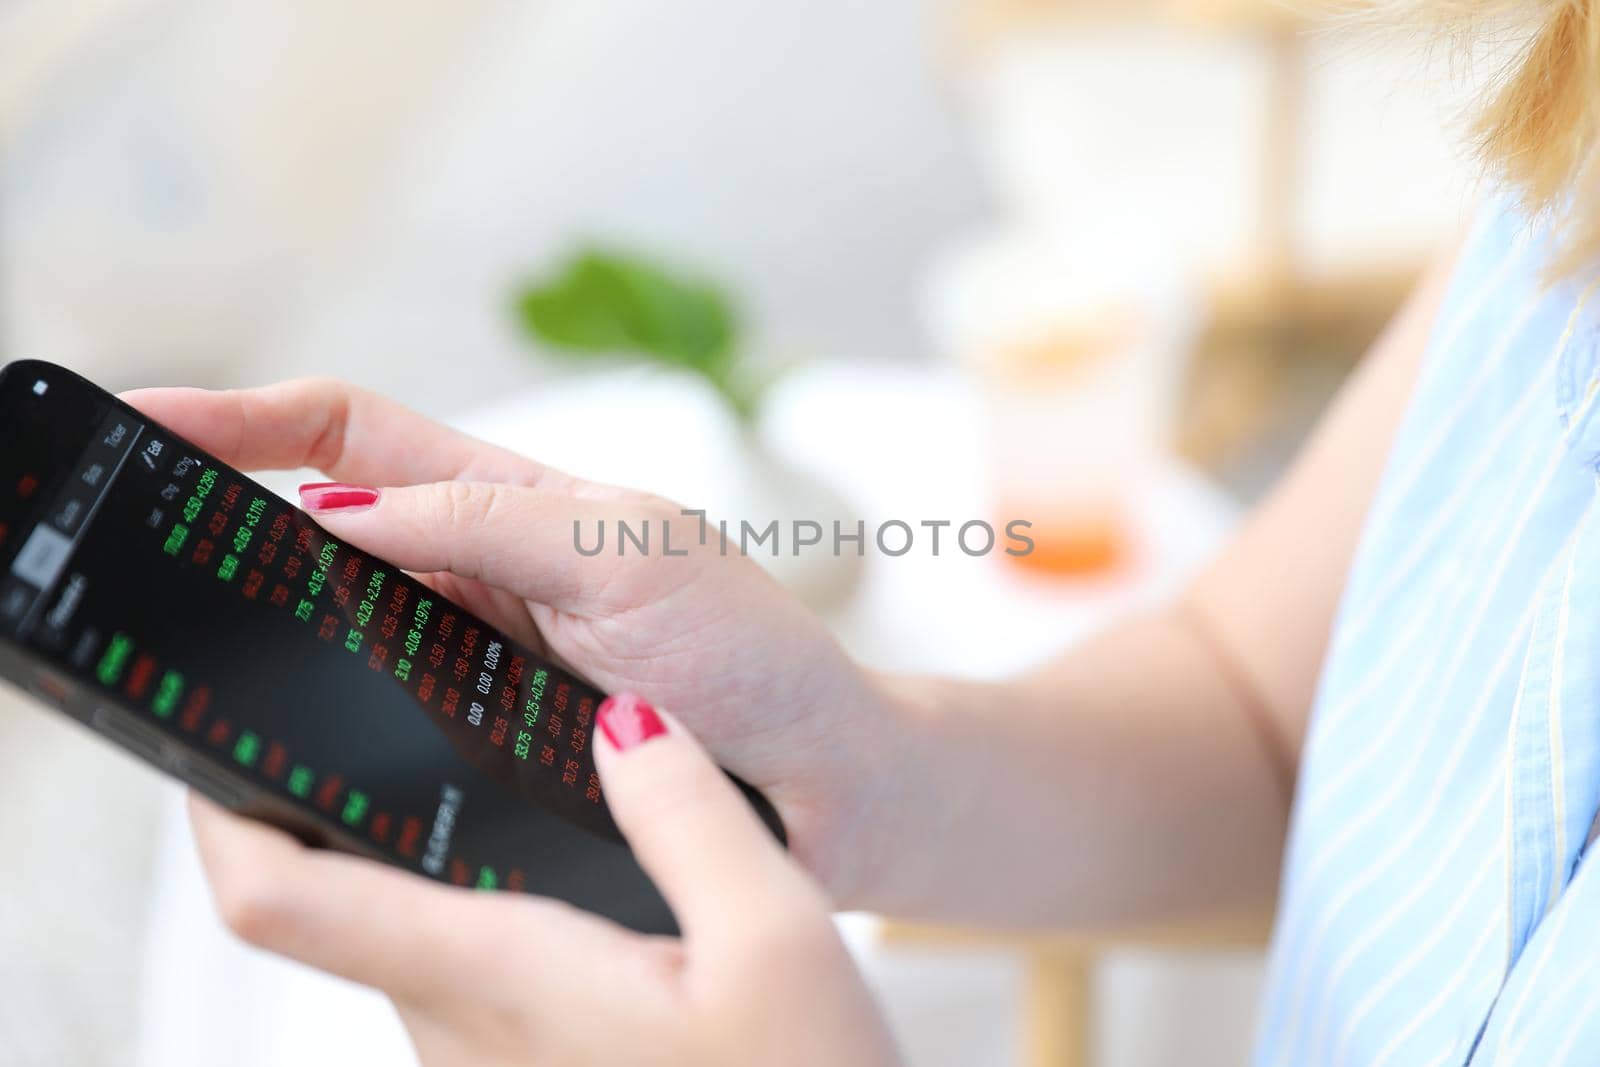 Female hand with smartphone trading stocks online in coffee shop Business concept